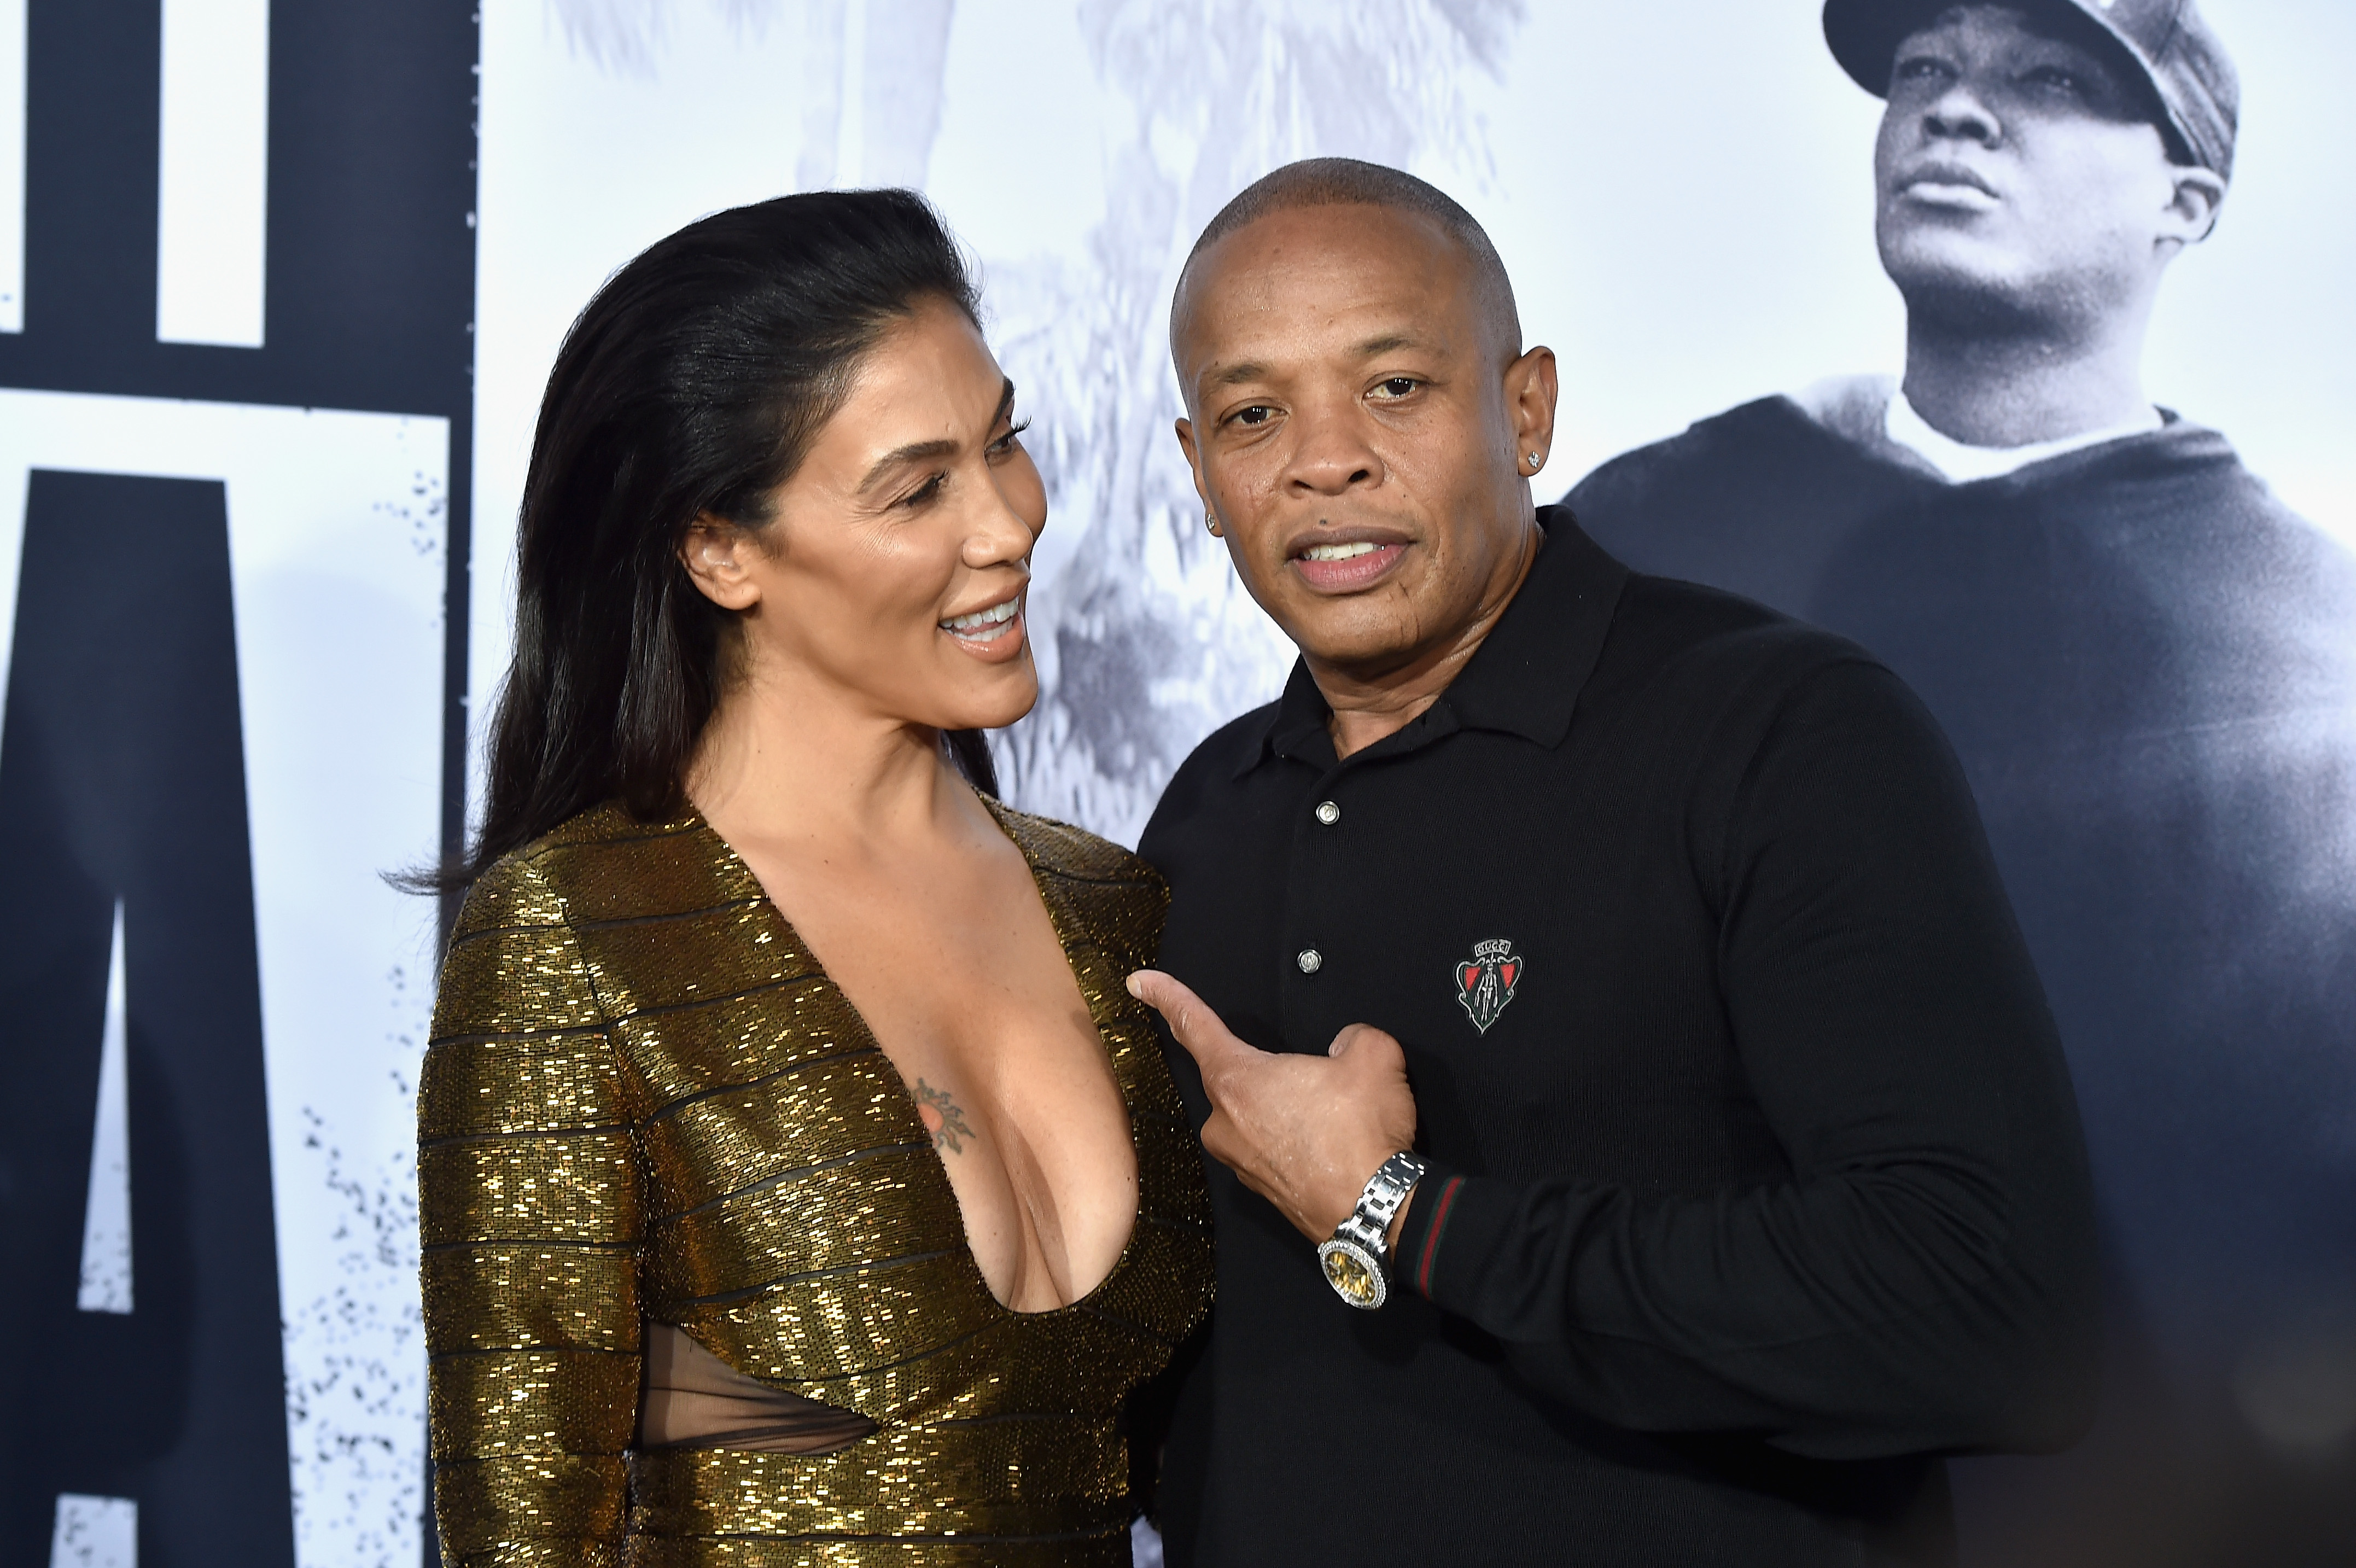 Nicole Threatt and Dr. Dre attend the Universal Pictures and Legendary Pictures' premiere of "Straight Outta Compton" at Microsoft Theater on August 10, 2015, in Los Angeles, California. | Source: Getty Images